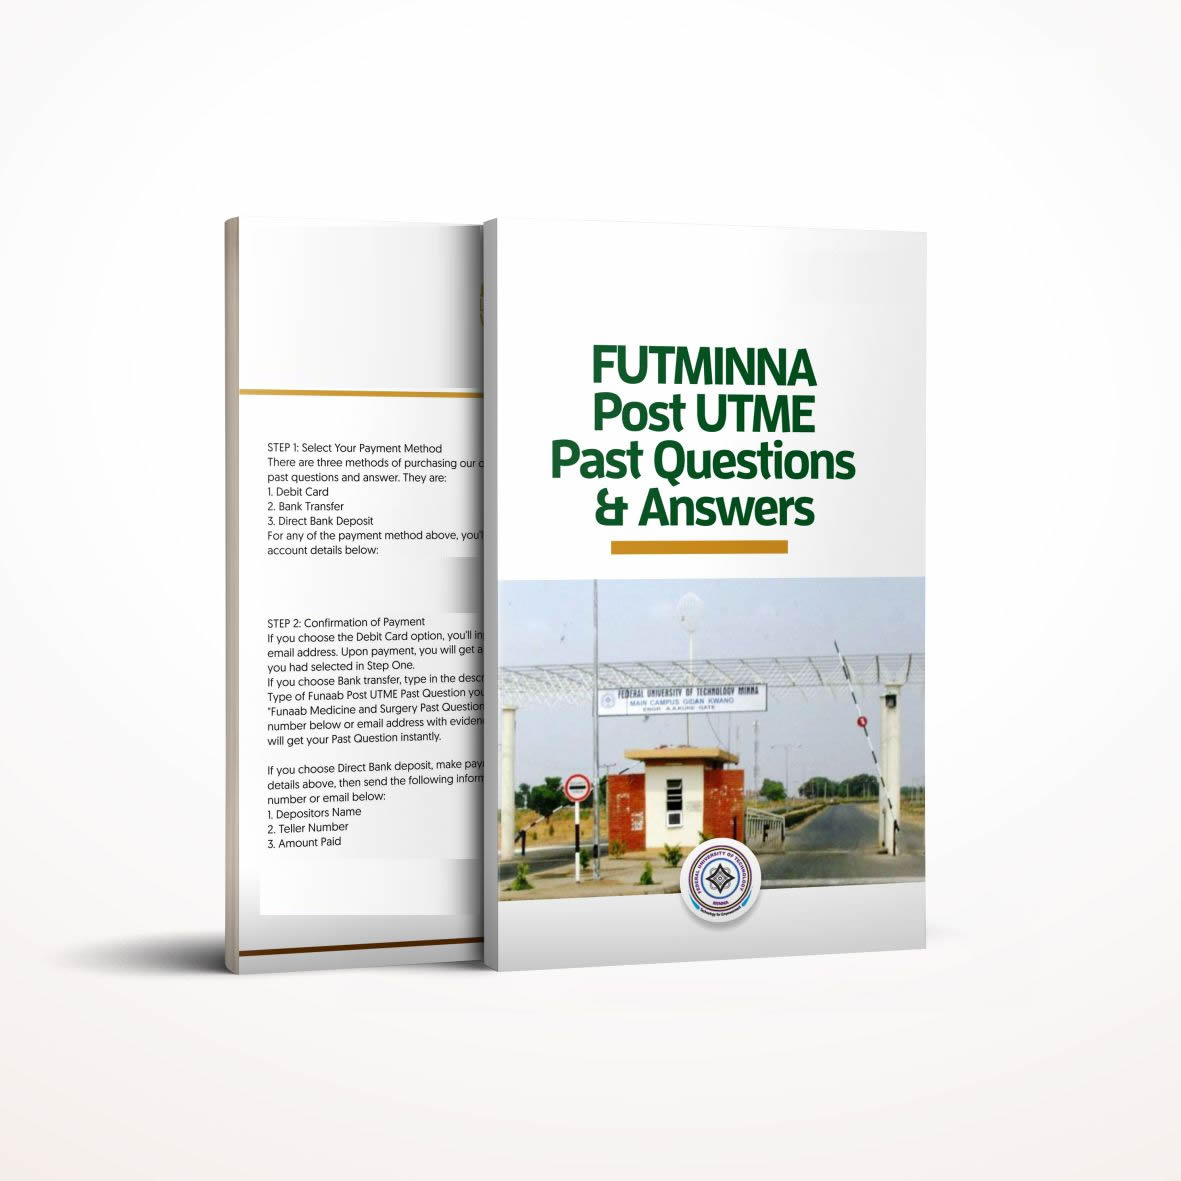 FUTMINNA Post UTME past questions and answers